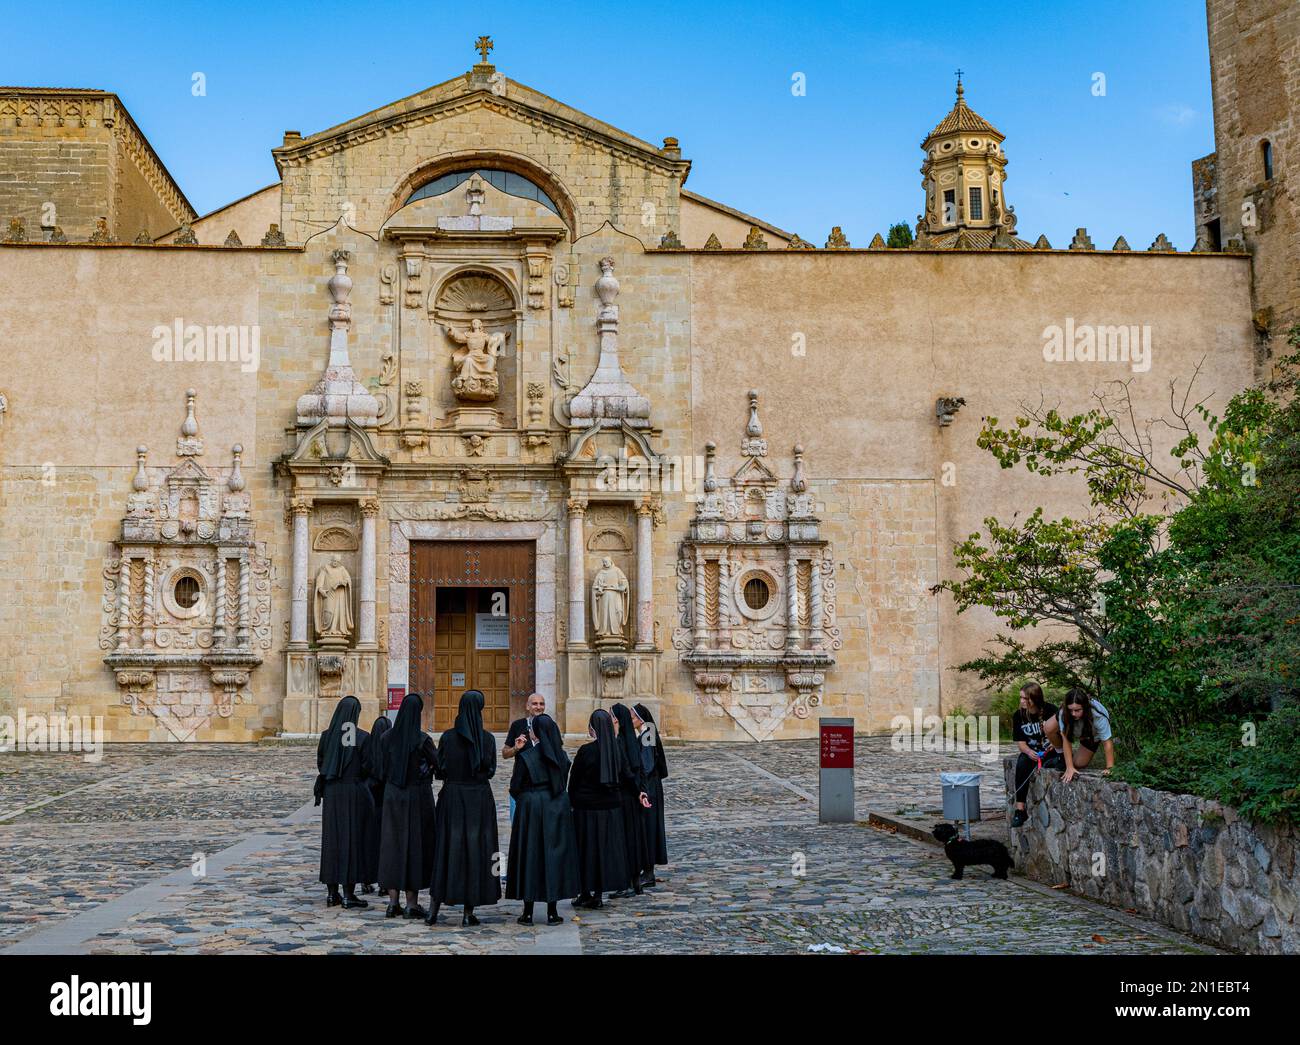 Nuns in front of the main portal of the church, Poblet Abbey, UNESCO World Heritage Site, Catalonia, Spain, Europe Stock Photo